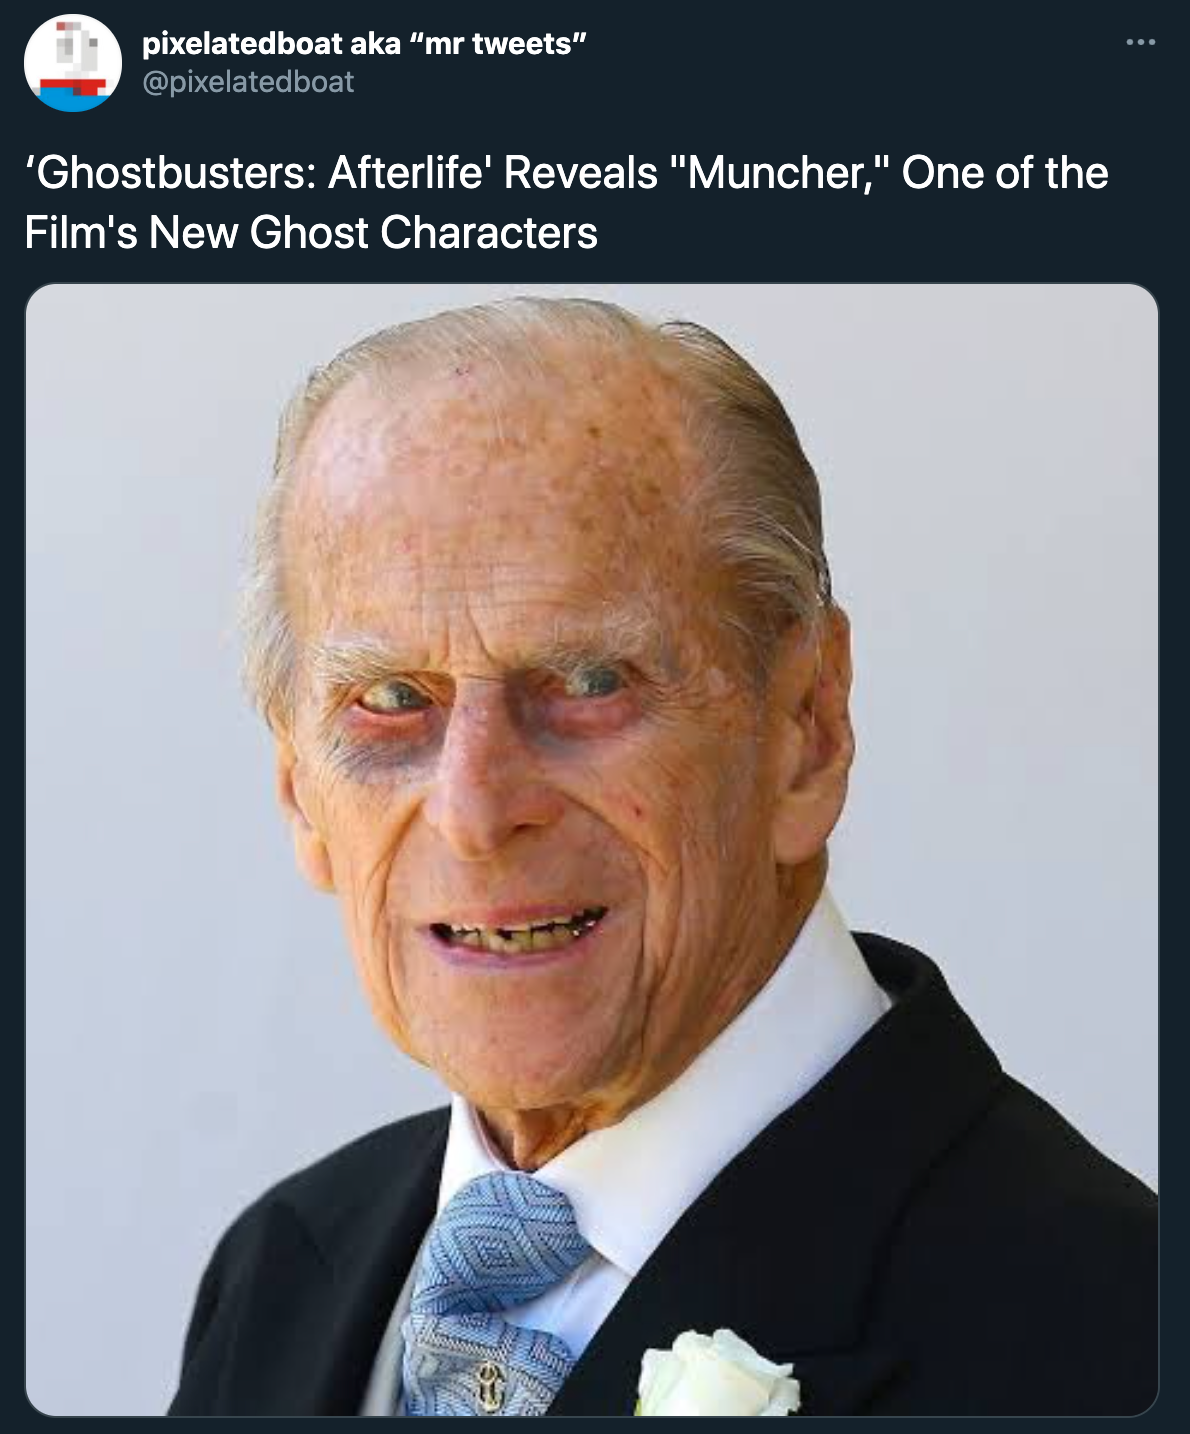 ghostbusters muncher sex memes - ghostbusters: afterlife reveals muncher one of the film's new ghost characters - prince charles